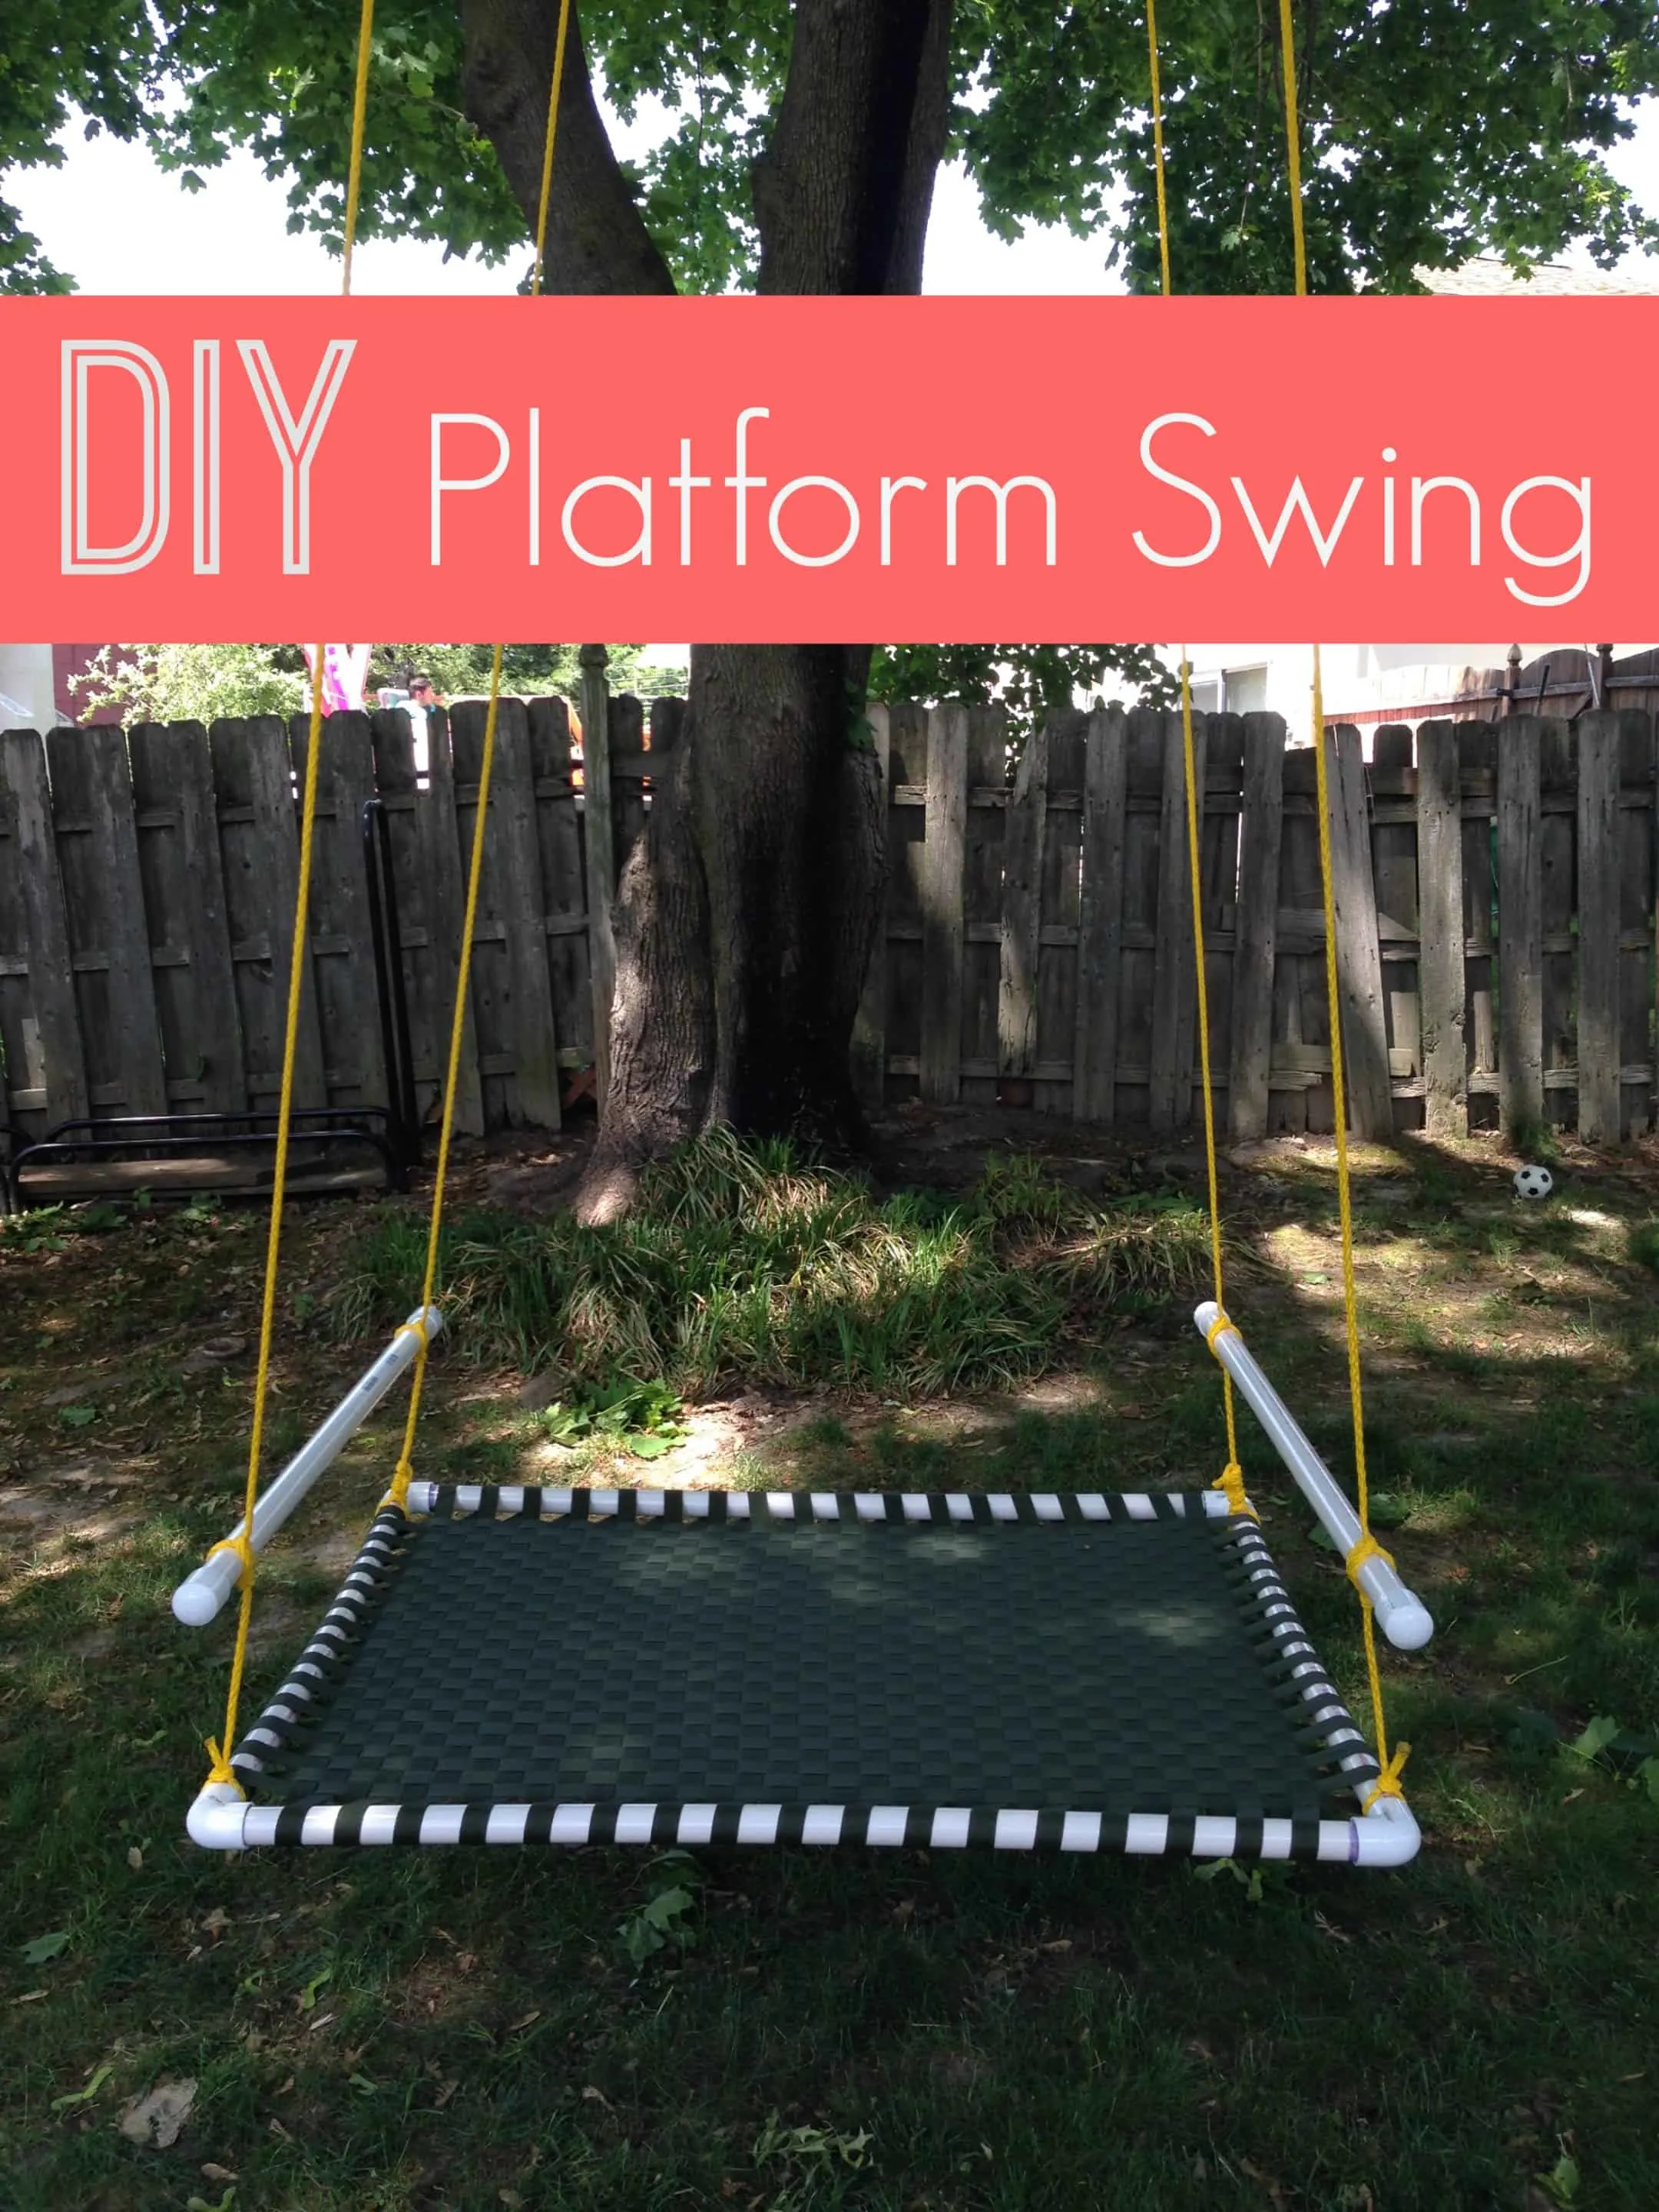 I love this DIY platform swing (via The Naughty Mommy). My kids would have a blast. So many great ideas for the backyard to keep the kids playing outside!